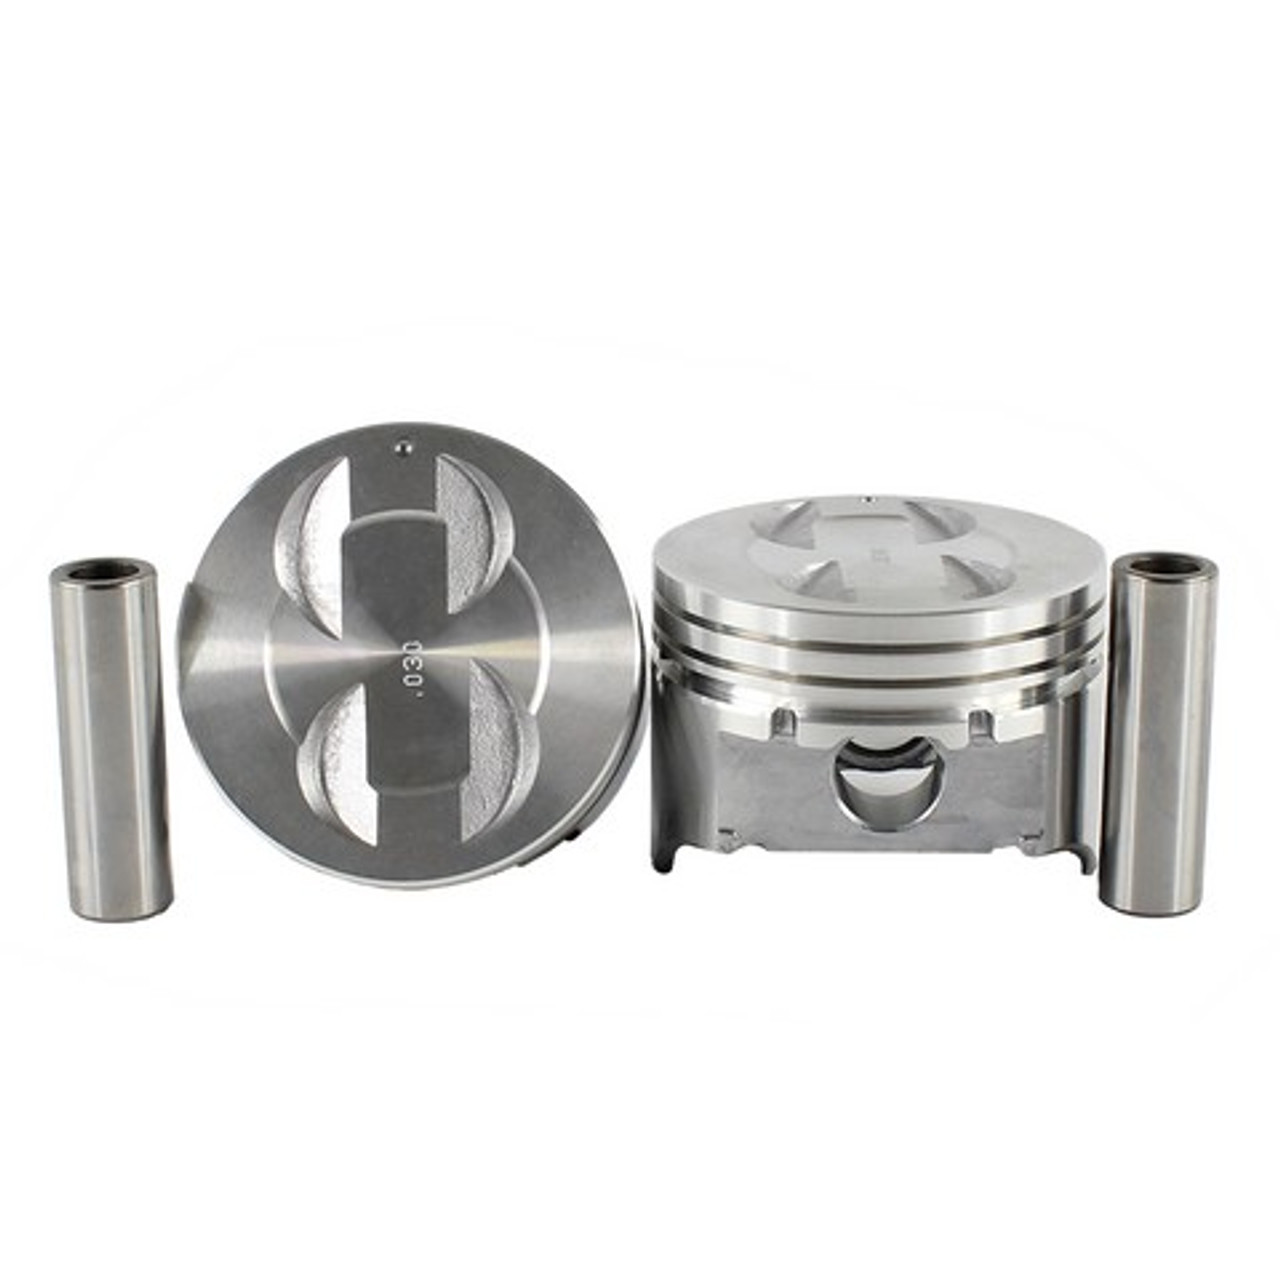 Piston Set 5.0L 1988 Ford Mustang - P4113A.51